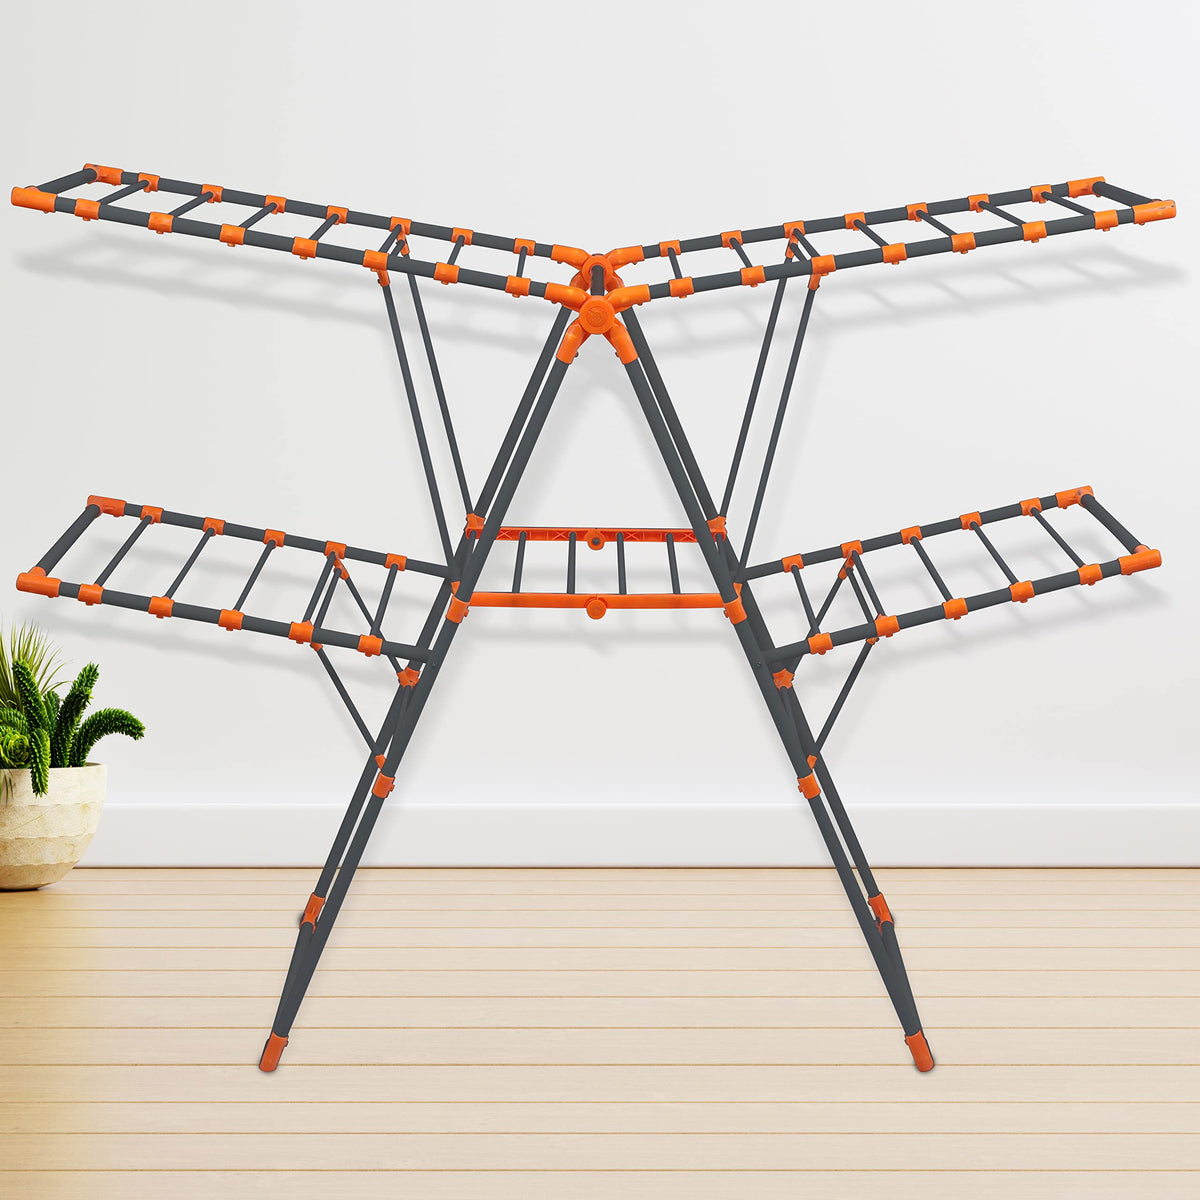 Plantex GI Steel Dual Tier Foldable Cloth Drying Stand/Cloth Rack/Clothes Hanger Stand for Home/Movable Cloths Rack – (Gray & Orange)